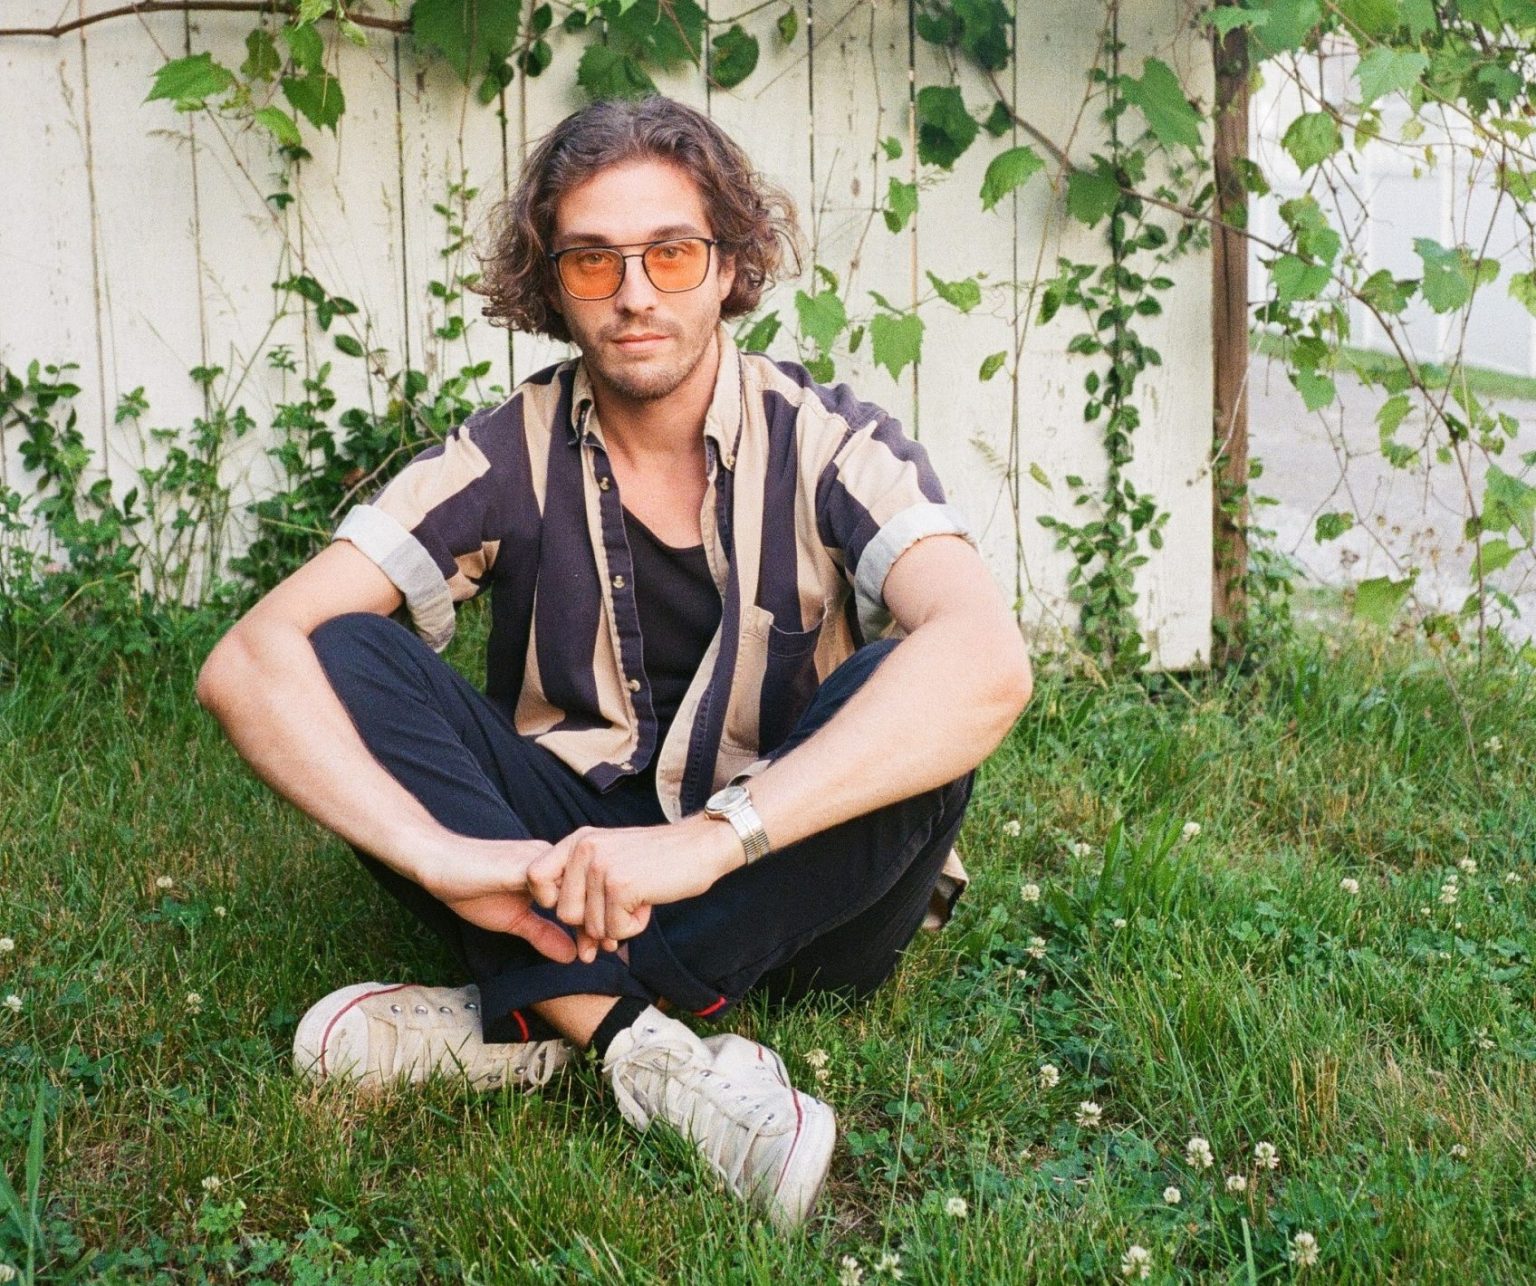 Damion leads us into Summer’s back half on temperate pop gem “Your ...